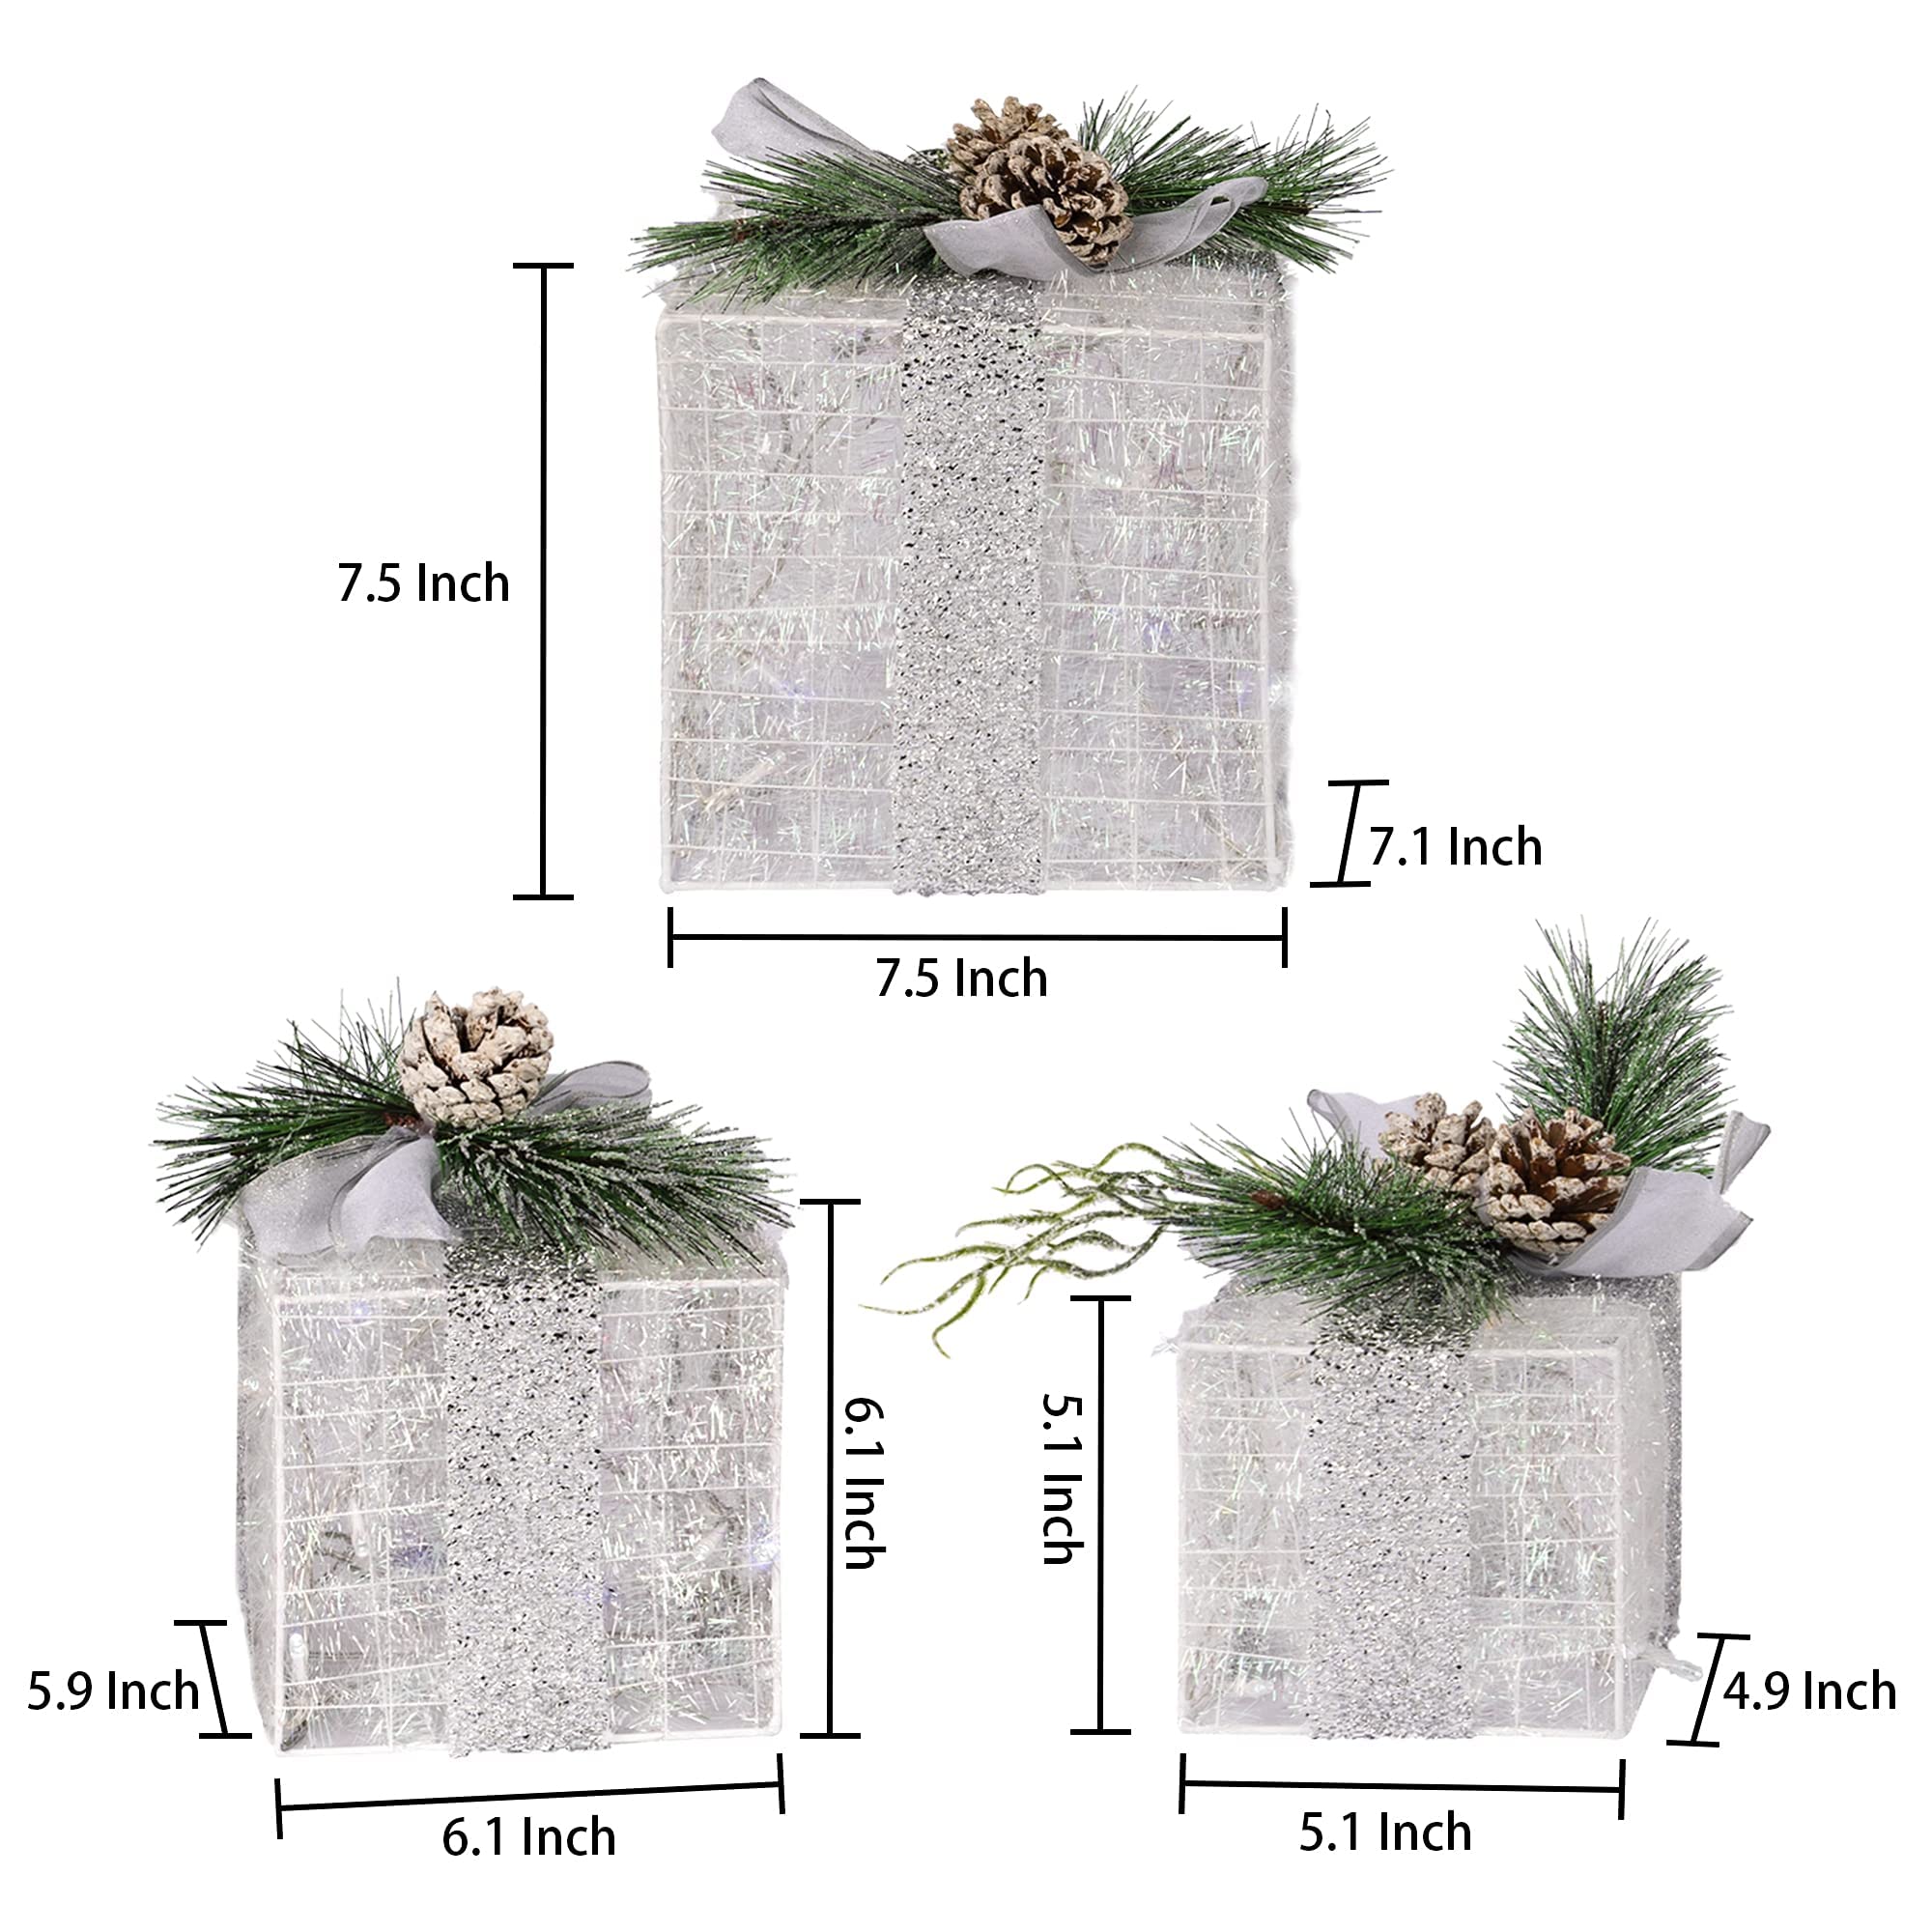 Set of 3 Christmas Lighted Gift Boxes, Plug in 60 LED Light Up Tinsel Present Box